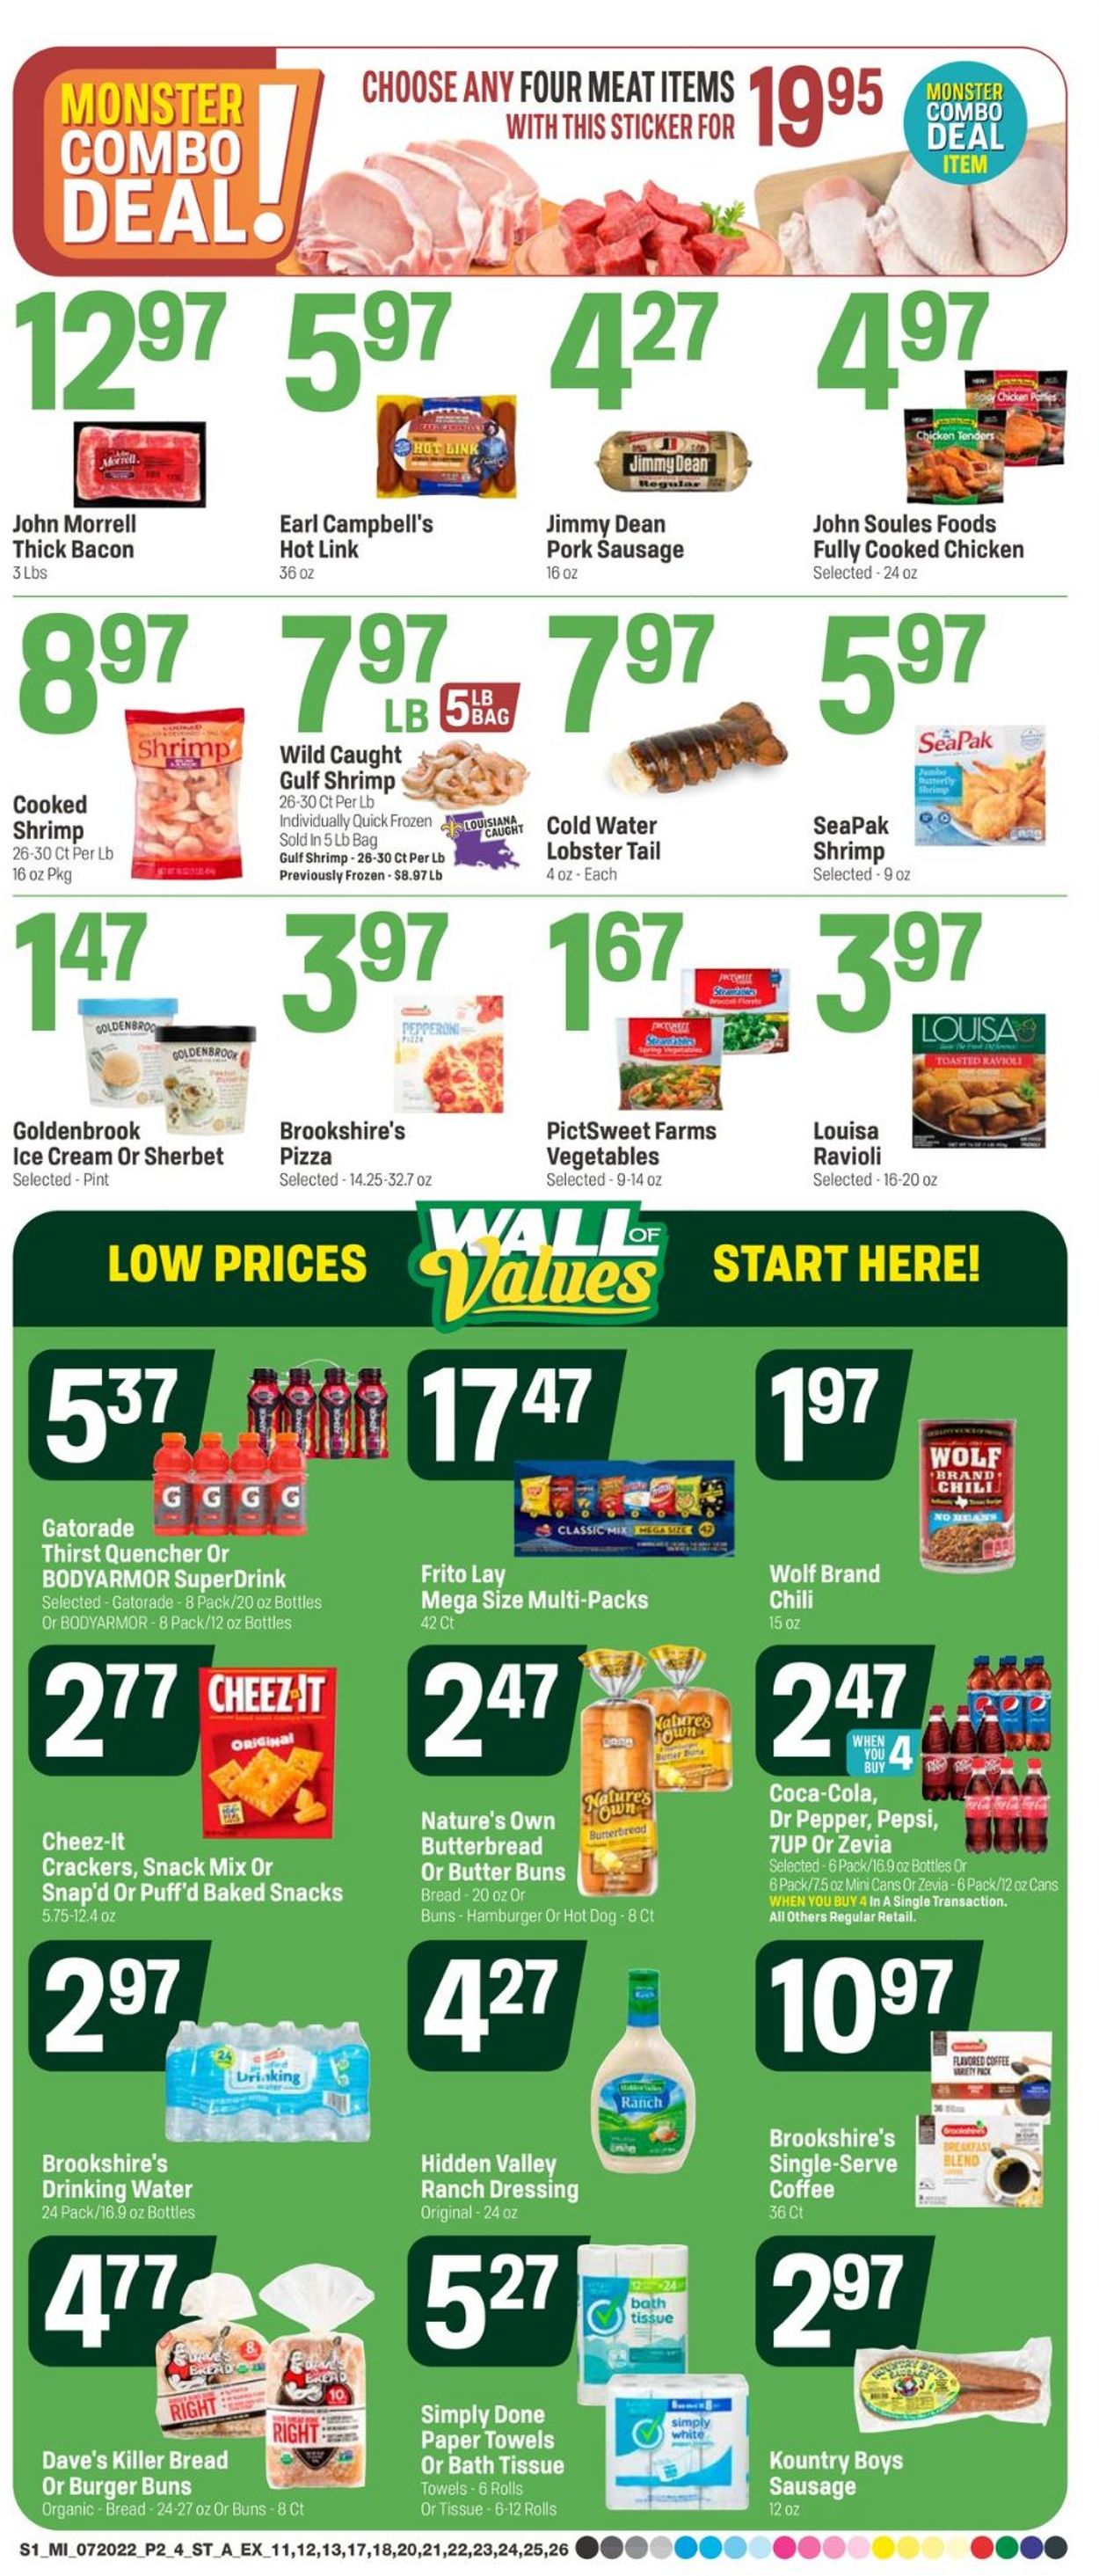 Catalogue Super 1 Foods from 07/20/2022